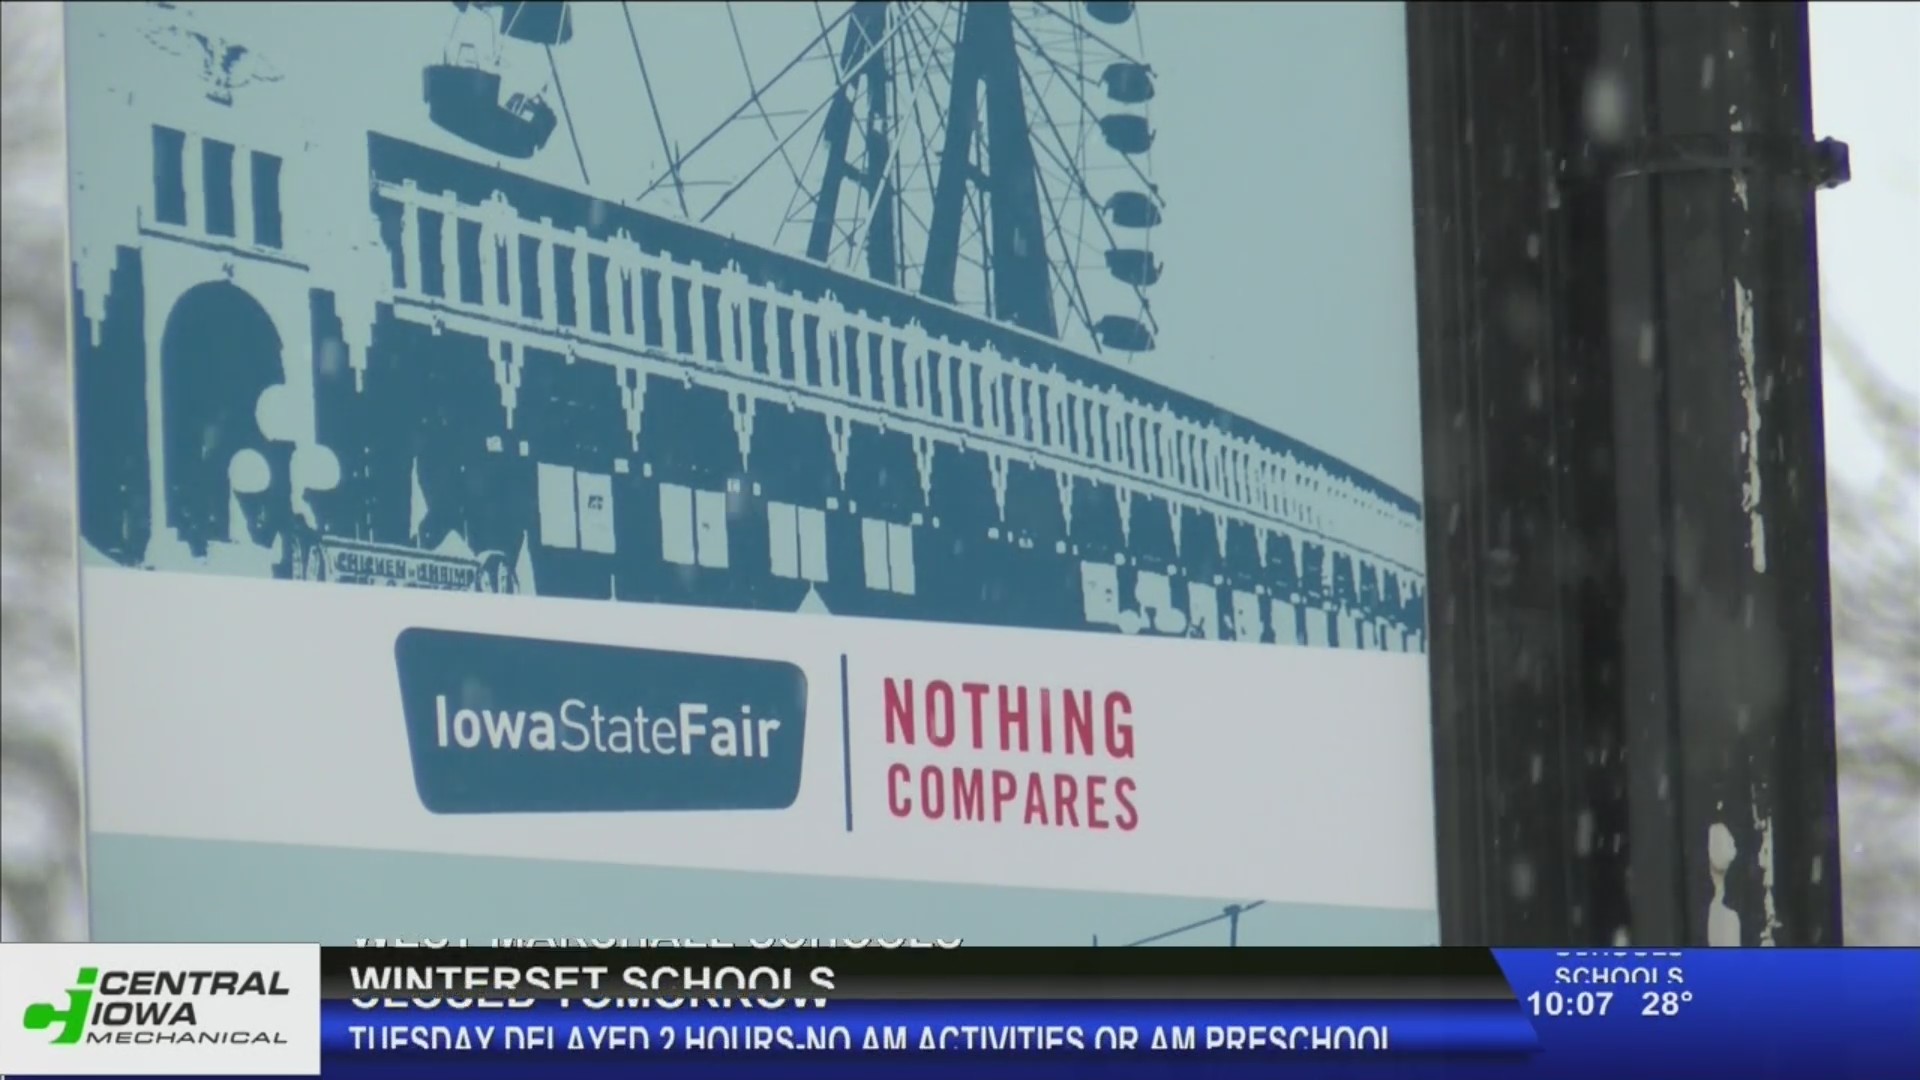 Six months from now, the Iowa State Fair will be underway. And with all this snwo and cold weather, it's nice to dream of a hot day at the fair, with all the indulgent foods.